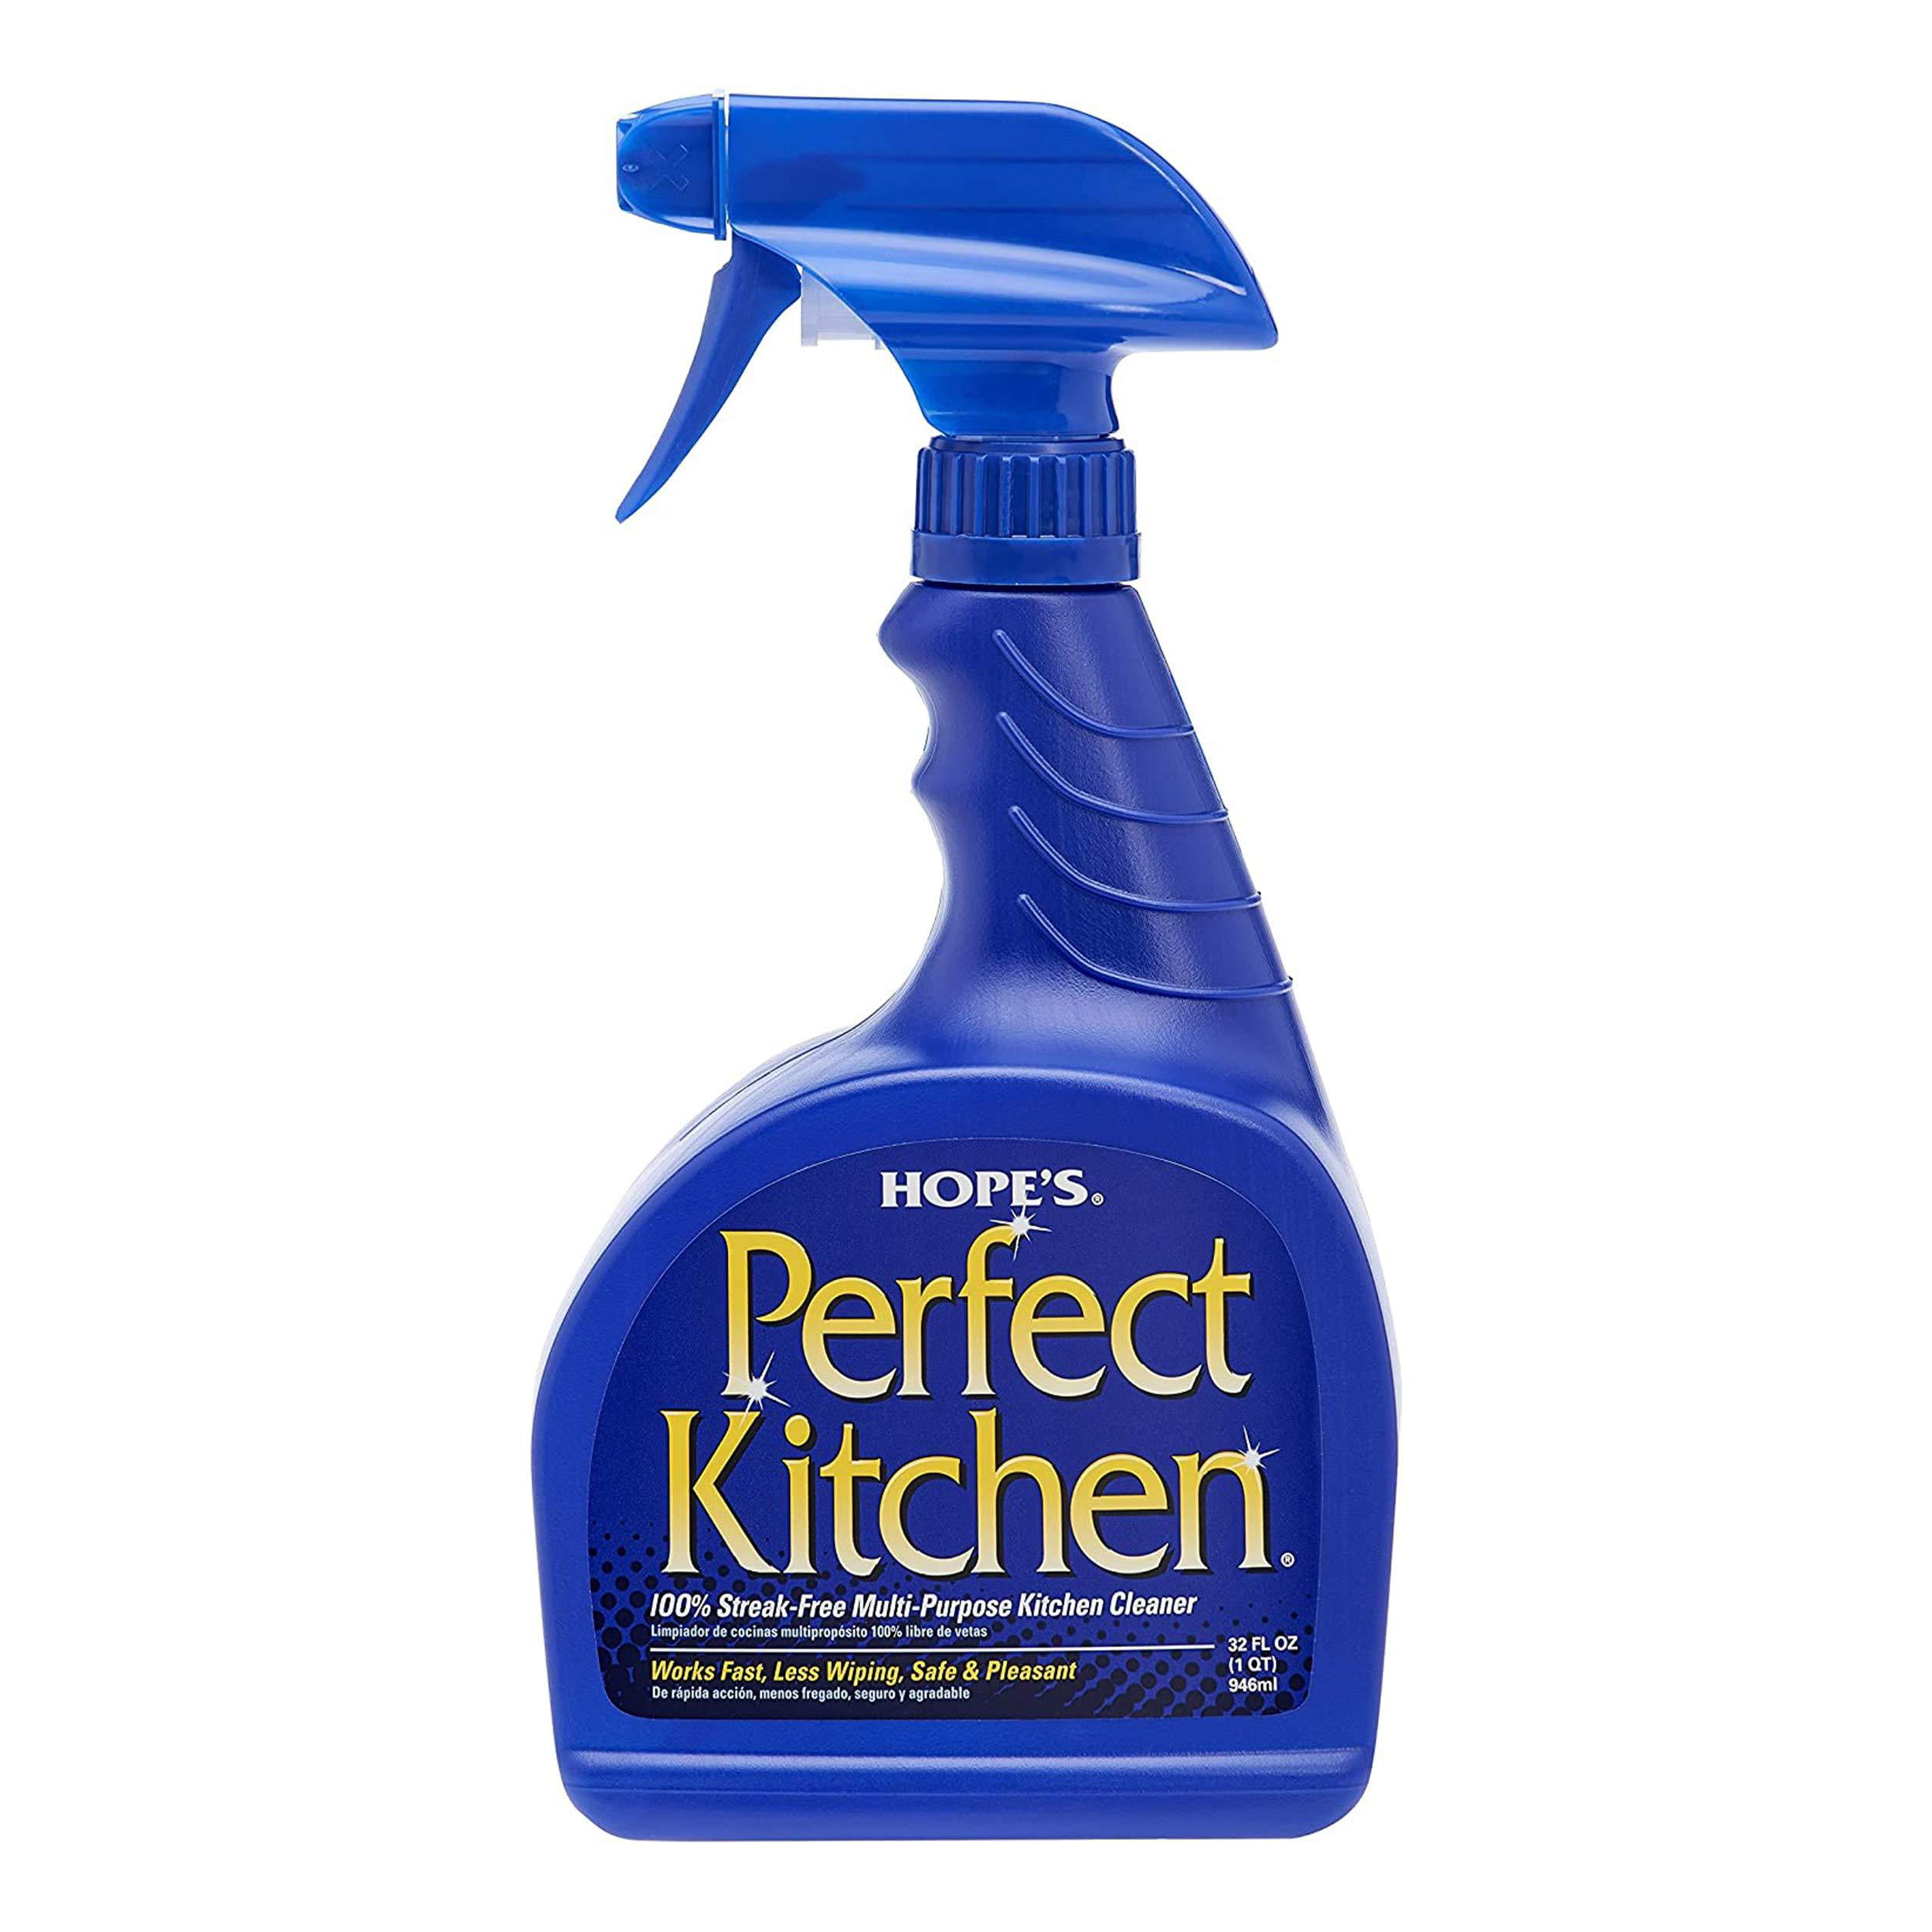 Hope's Perfect Kitchen Cleaner, 32-Ounce, Multi-Purpose Kitchen ...
